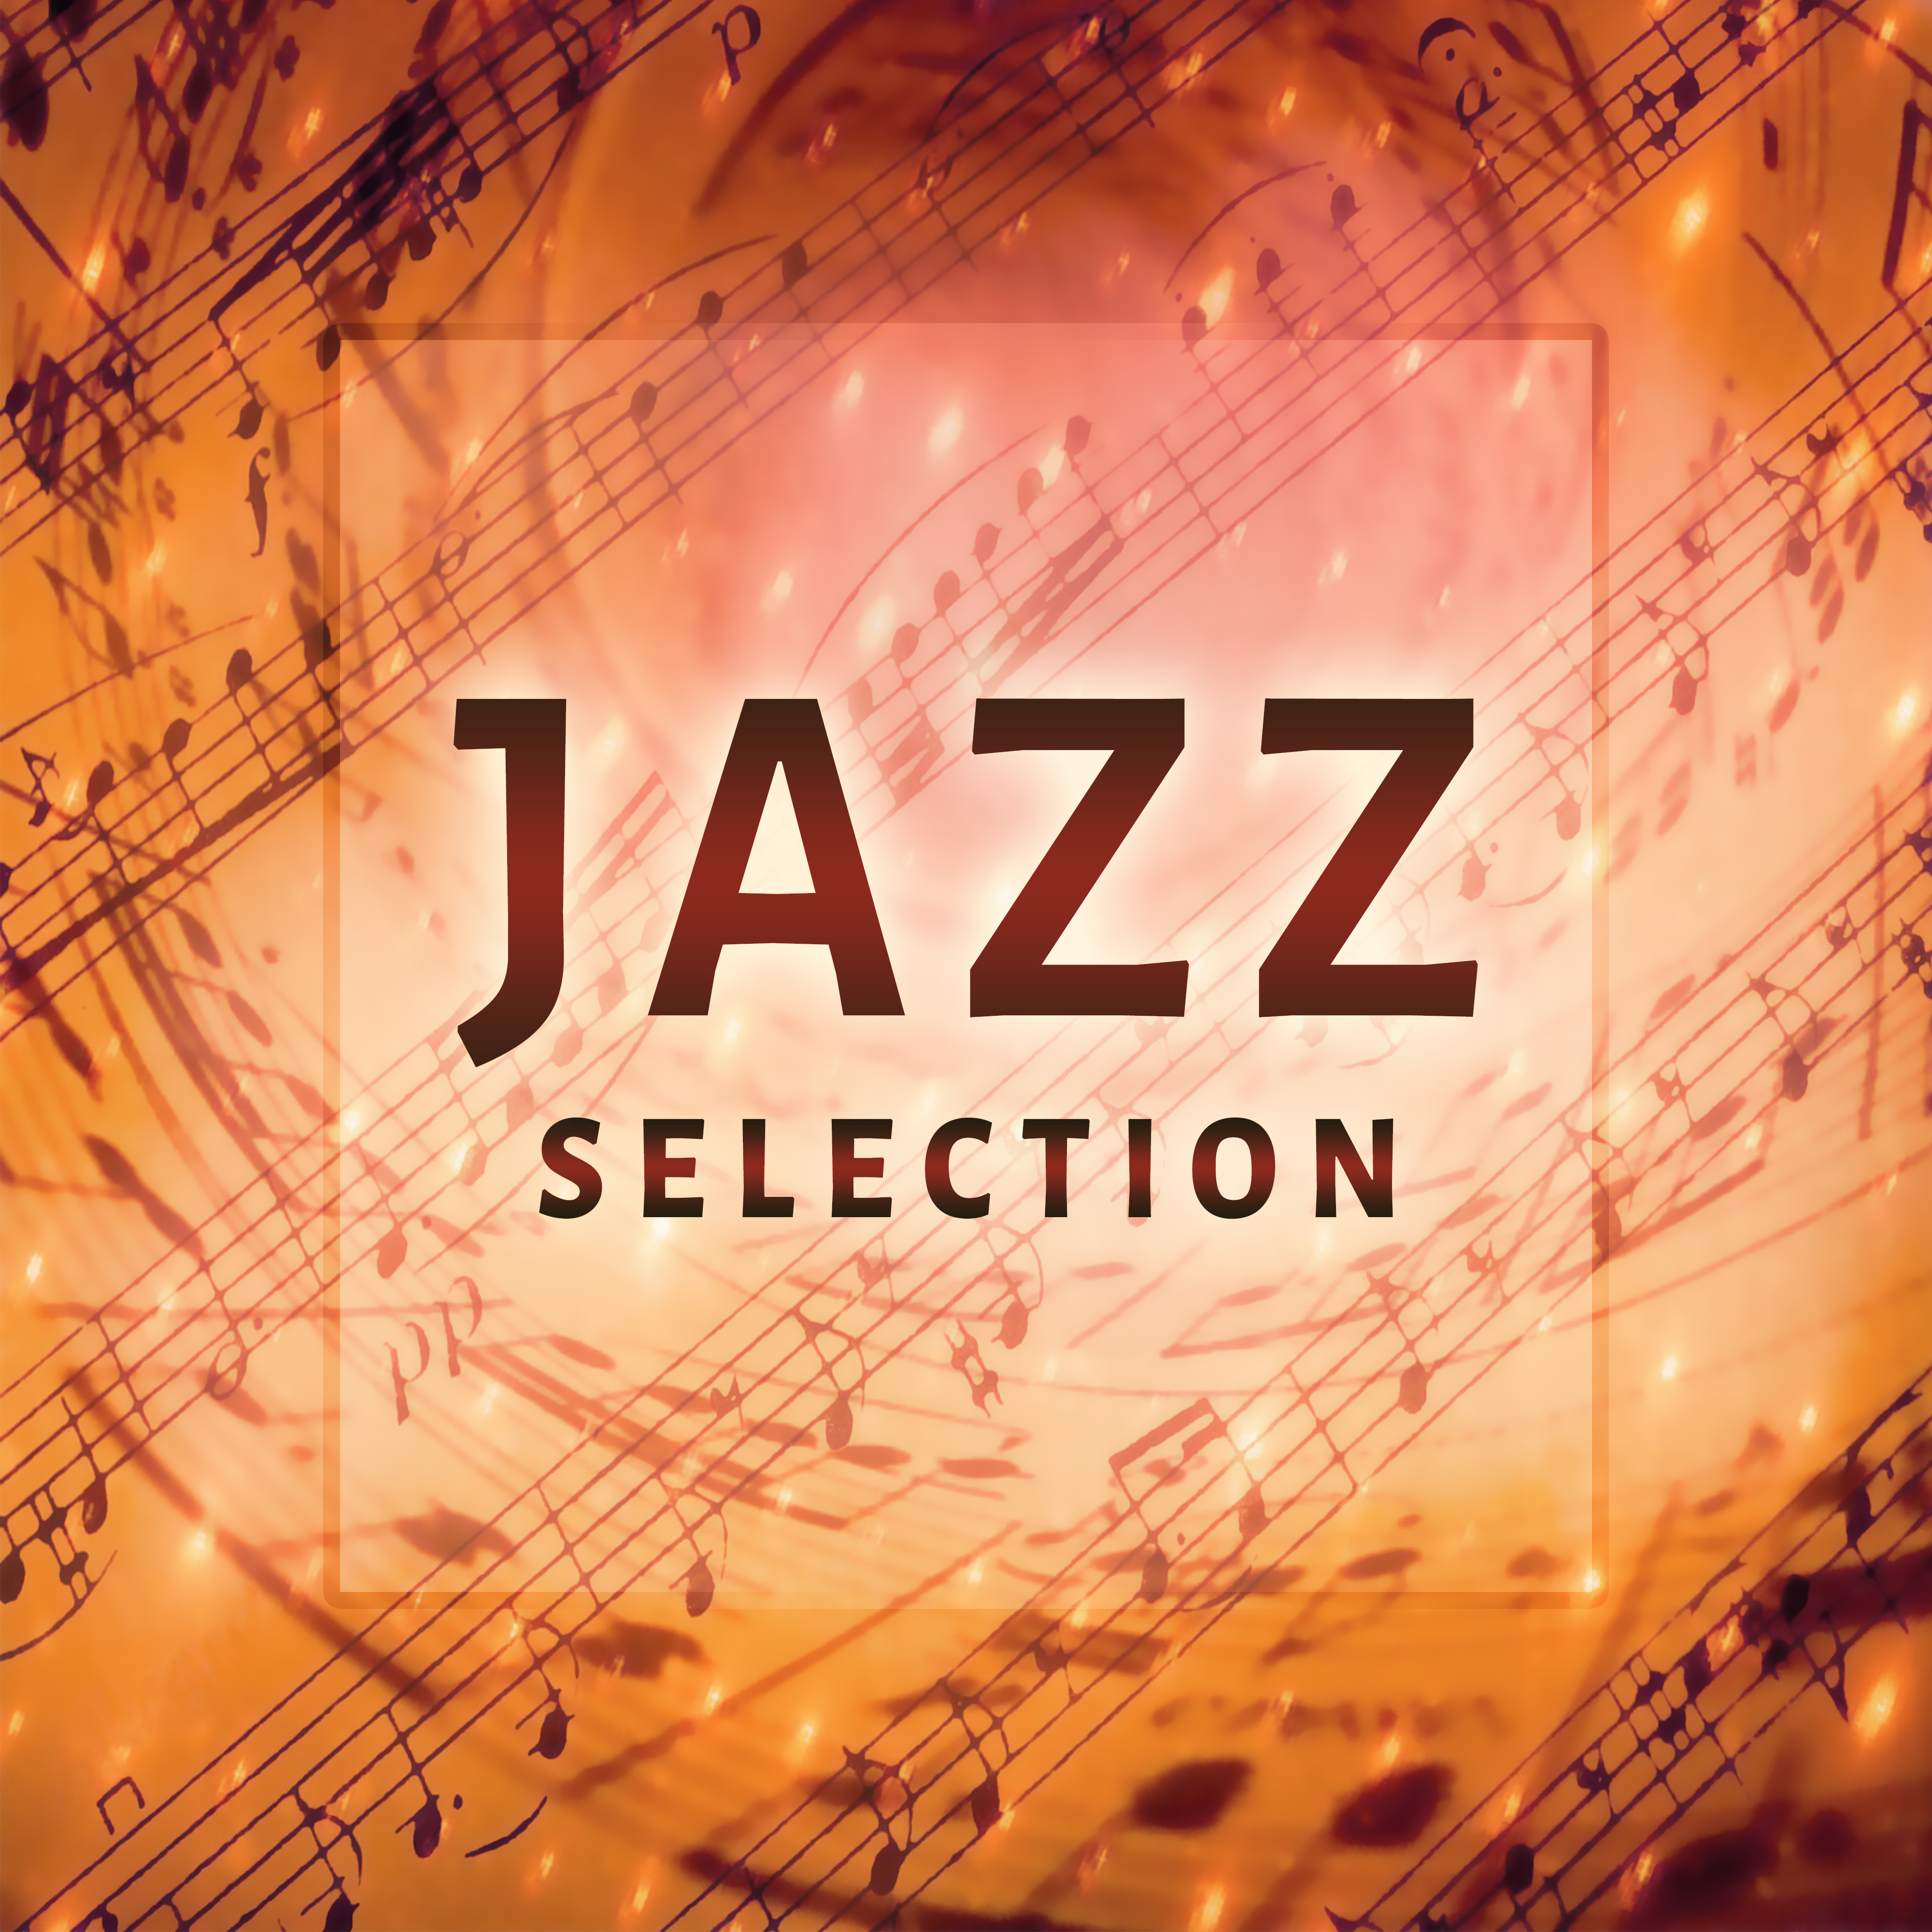 Jazz Selection – Best Mellow Jazz Music, Peaceful Piano Sounds, Ambient Lounge, Smooth Background Jazz, Jazz Music